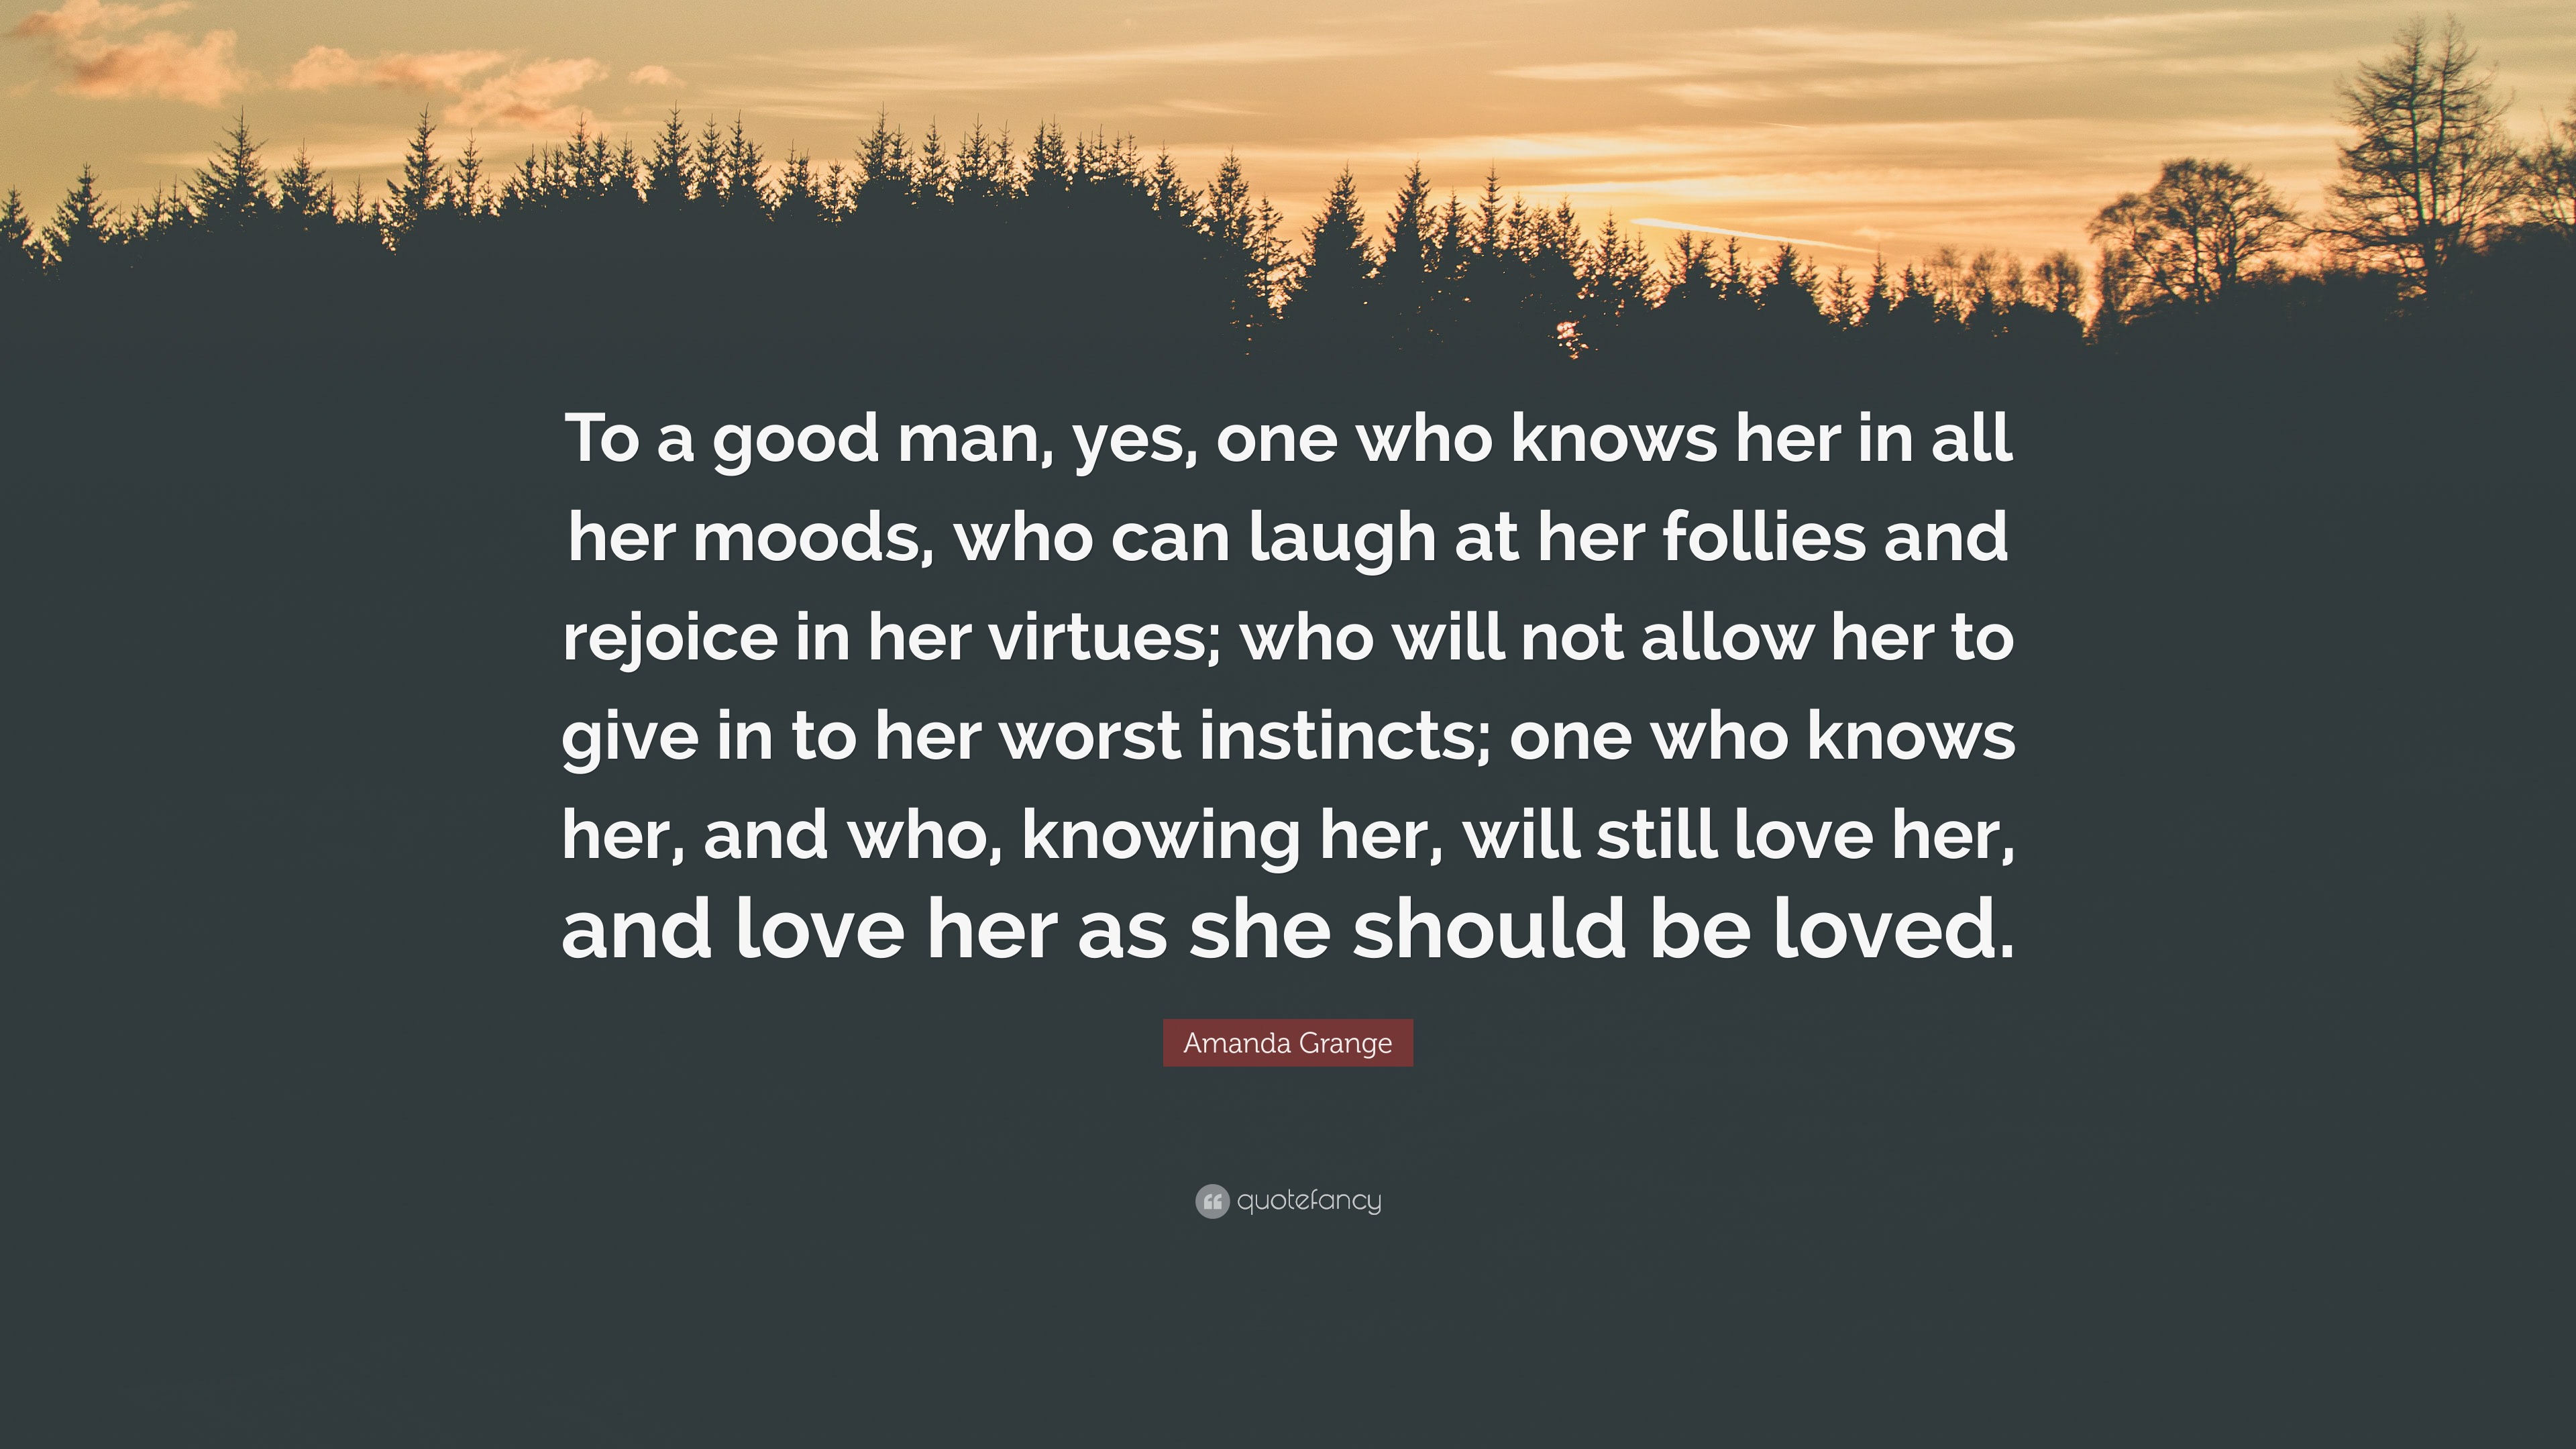 Amanda Grange Quote: “To a good man, yes, one who knows her in all her ...